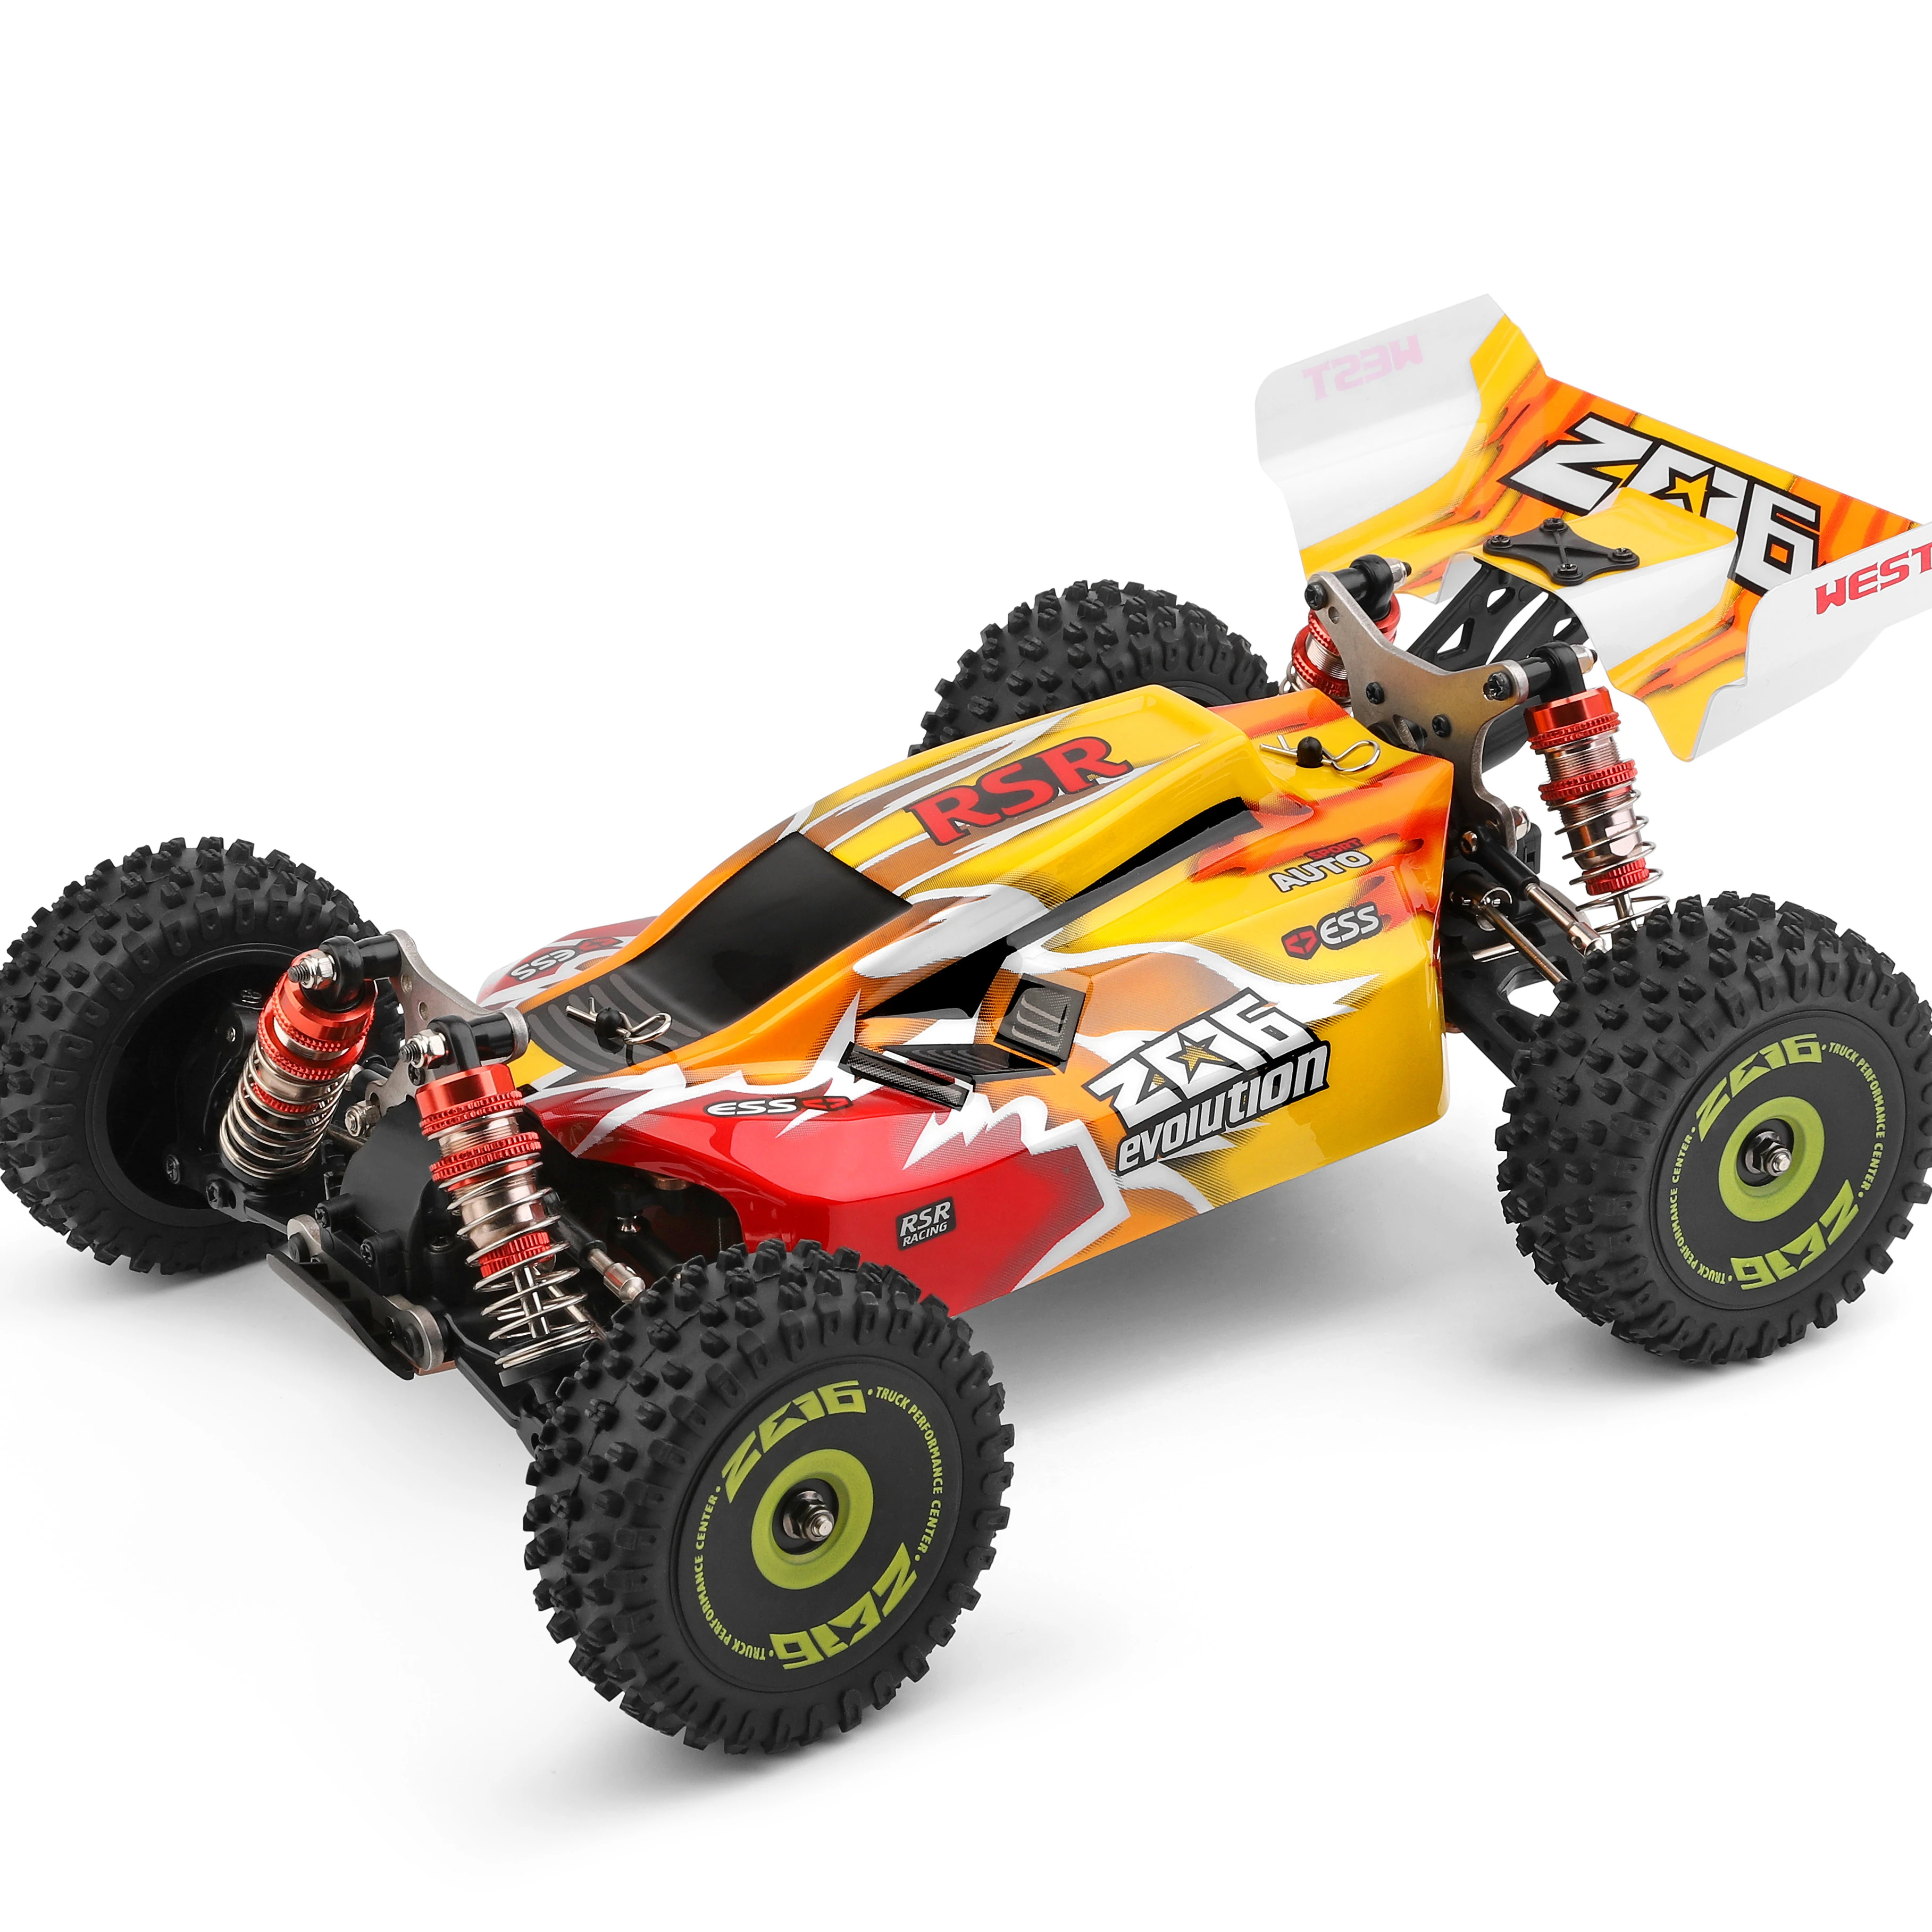 

WLtoys 144010 144001 75KM/H 2.4G RC Car Brushless motor 4WD Electric High Speed Off-Road Remote Control Drift Toys for Children